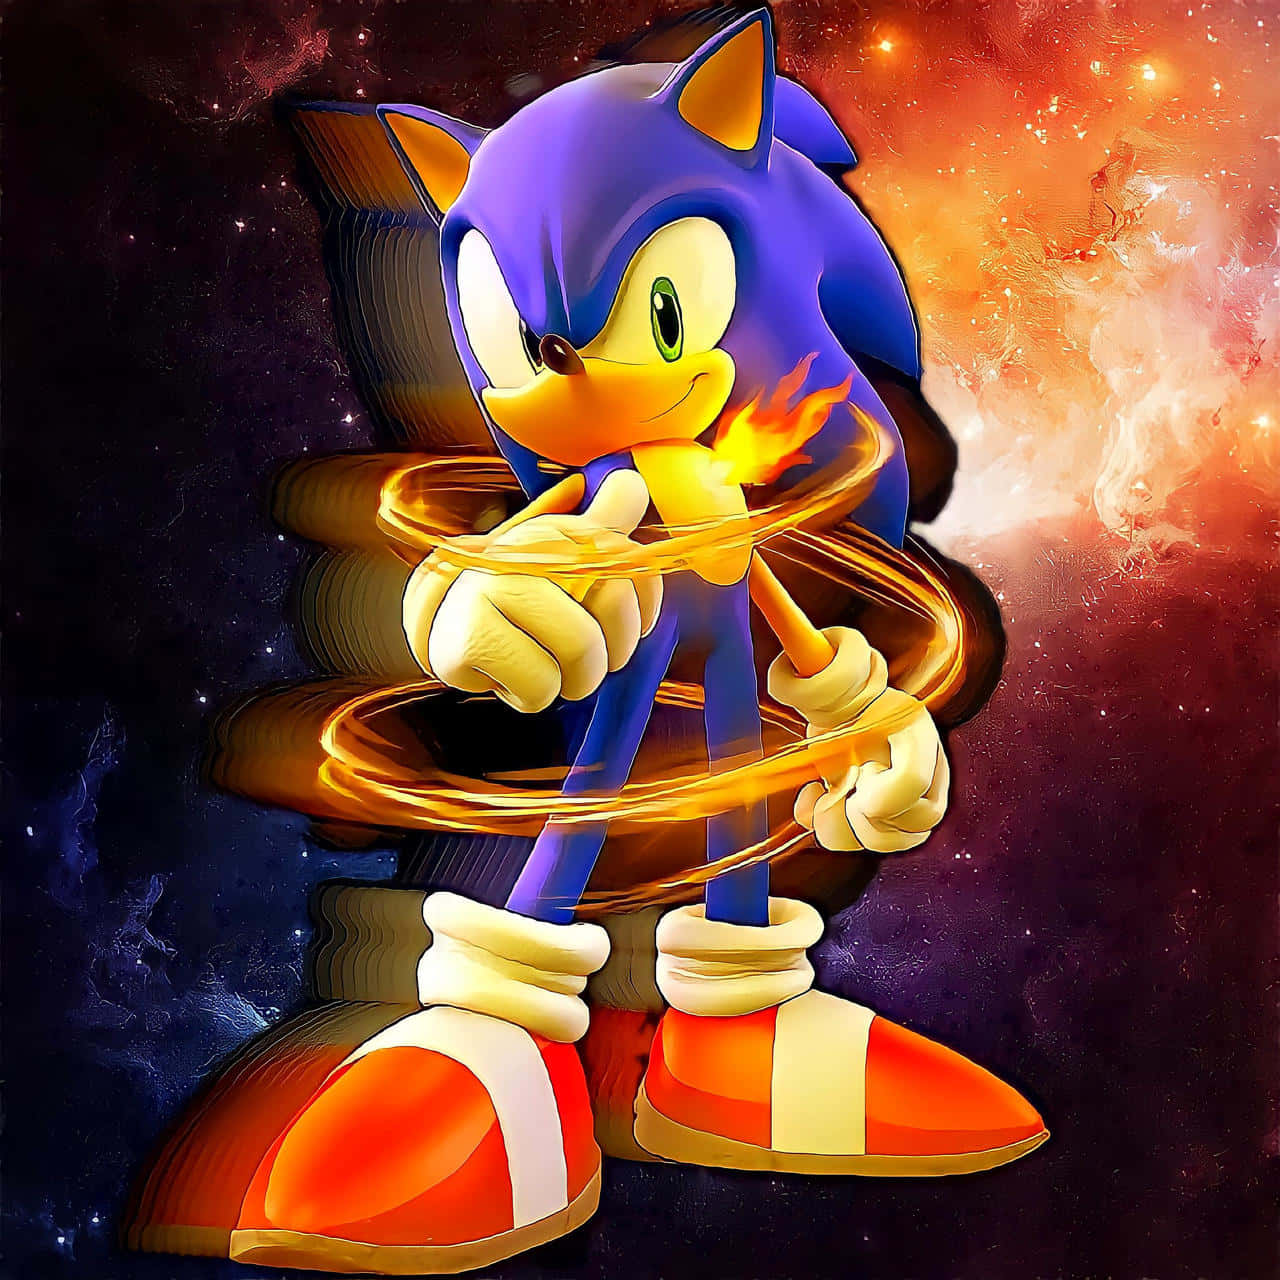 Sonic embarks on an adventurous journey in the colorful world of The Secret Rings. Wallpaper